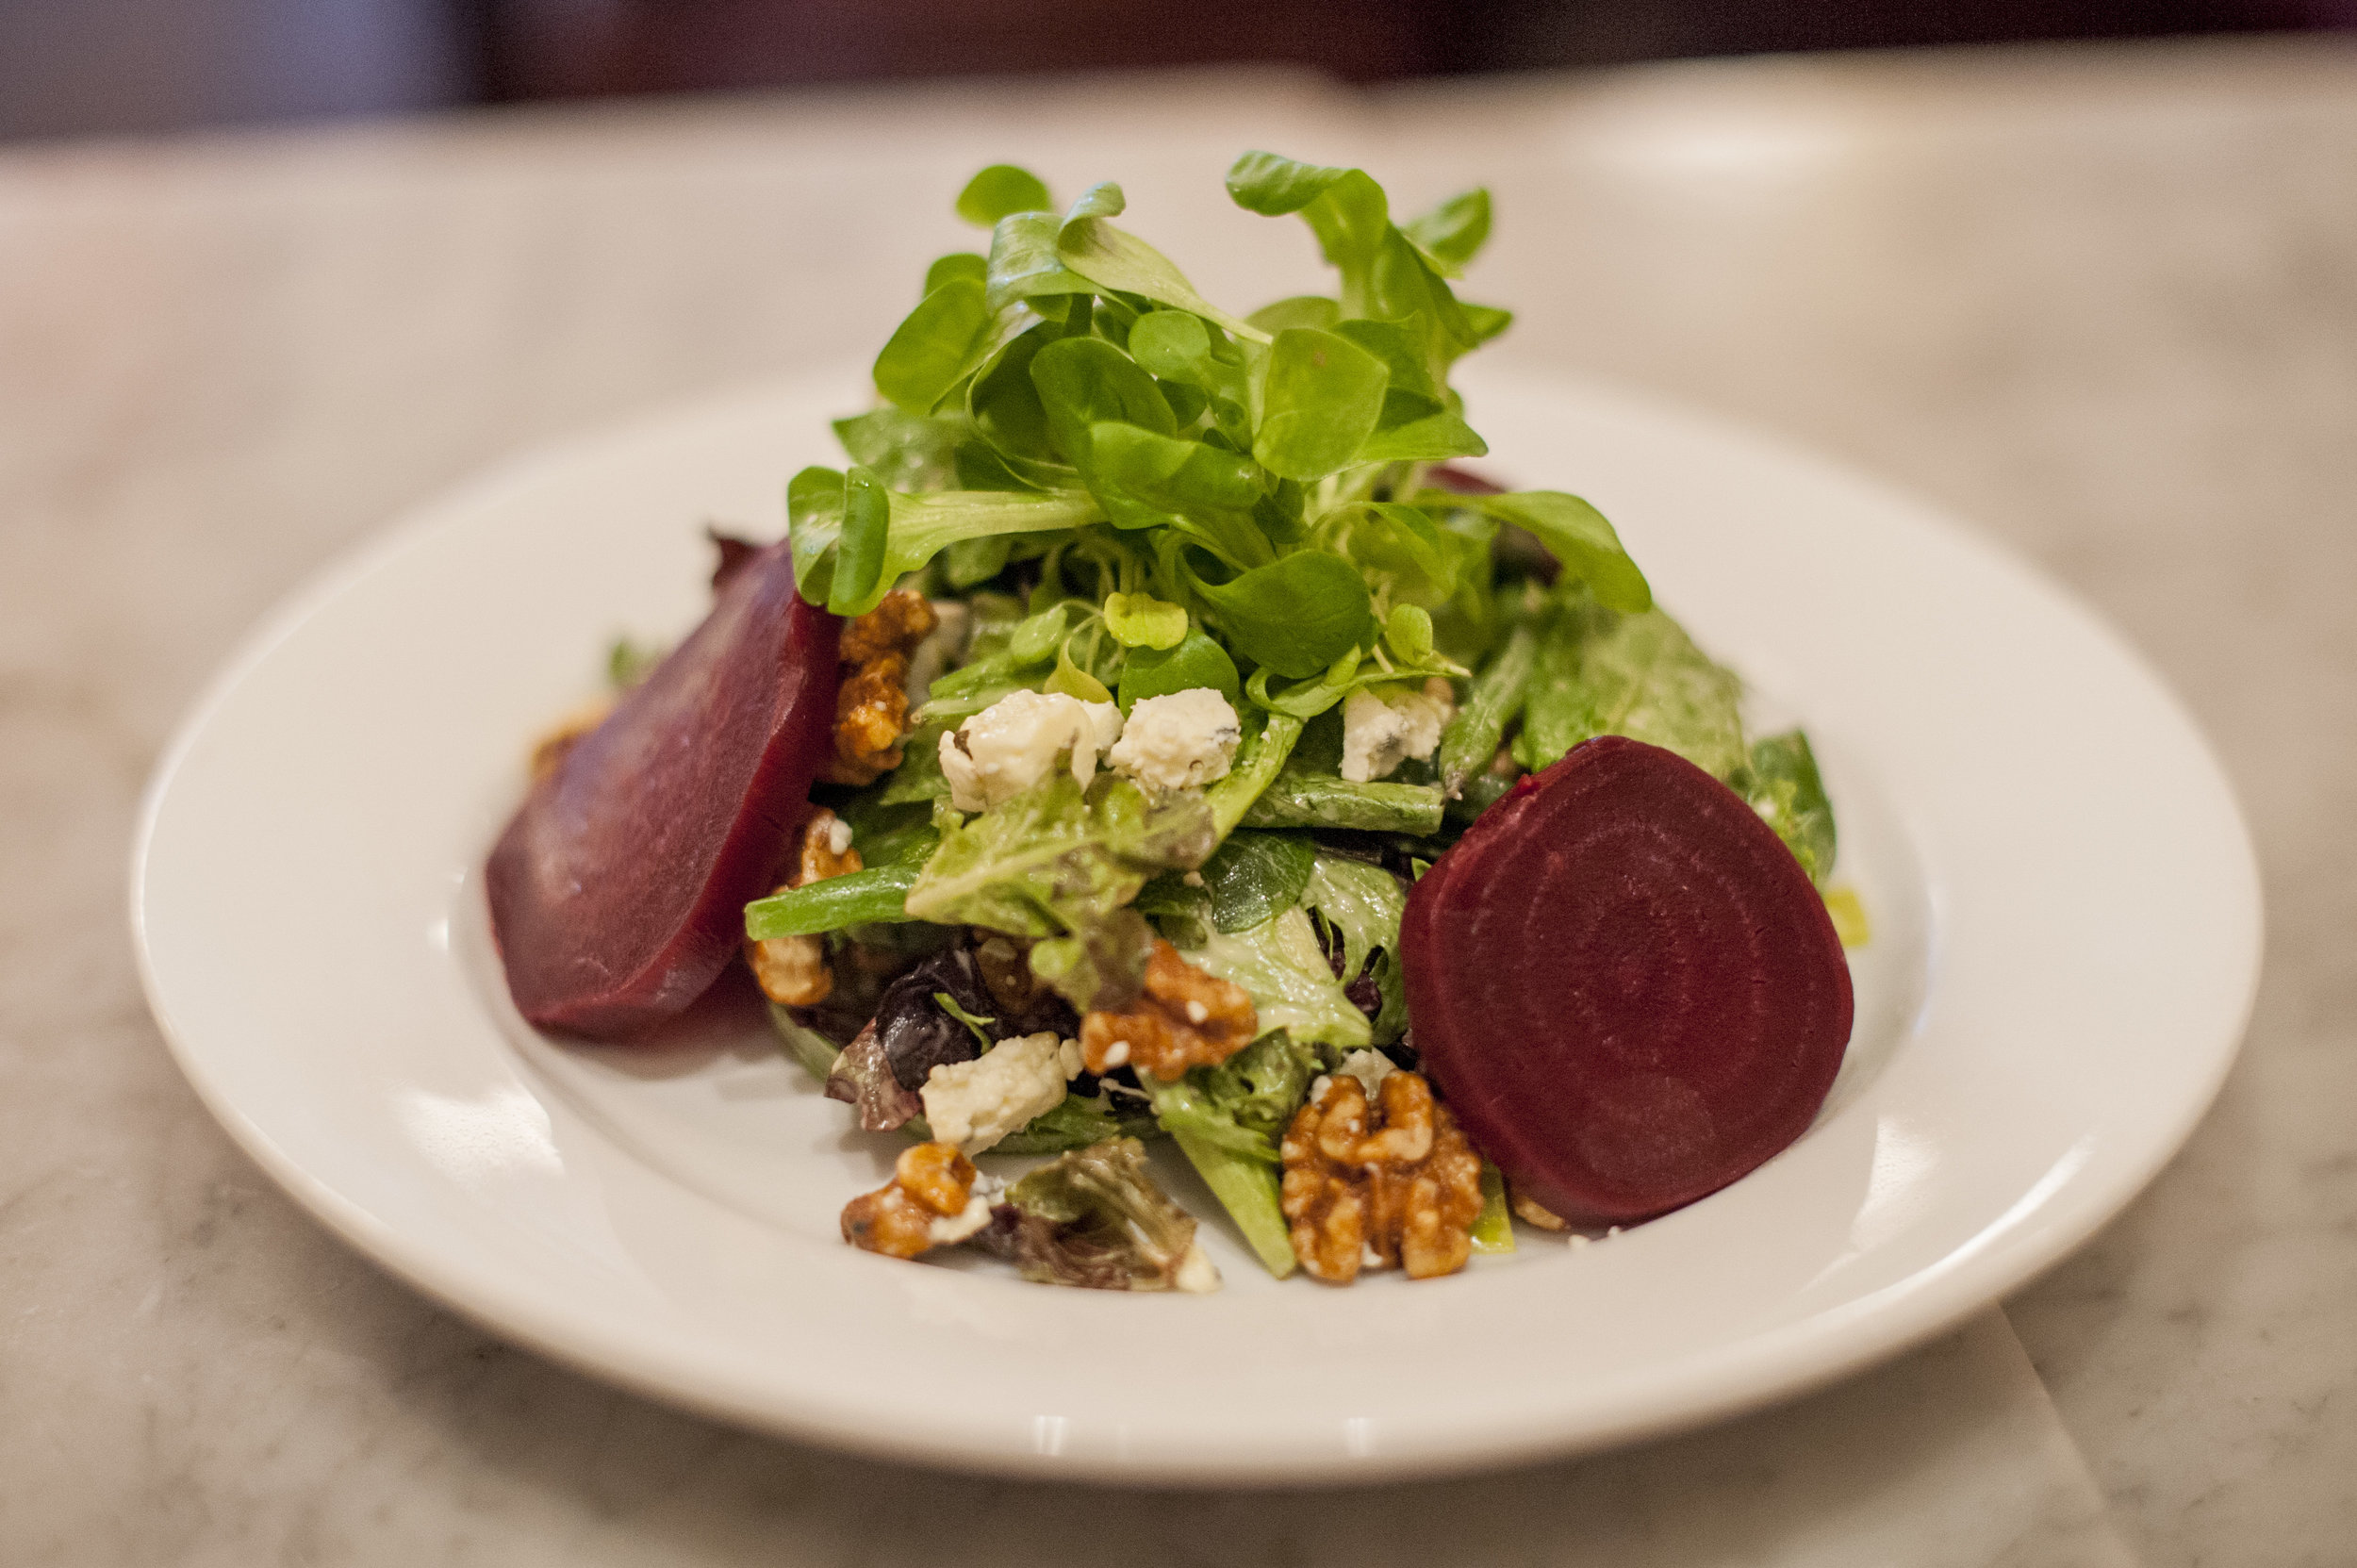  Long Islander News photos/Jano Tantongco The Salade Cassis features microgreens, Roquefort cheese, roasted beets, walnuts, French beans, poached leeks and dijon vinaigrette, creating a mix of bold and fresh flavors. 